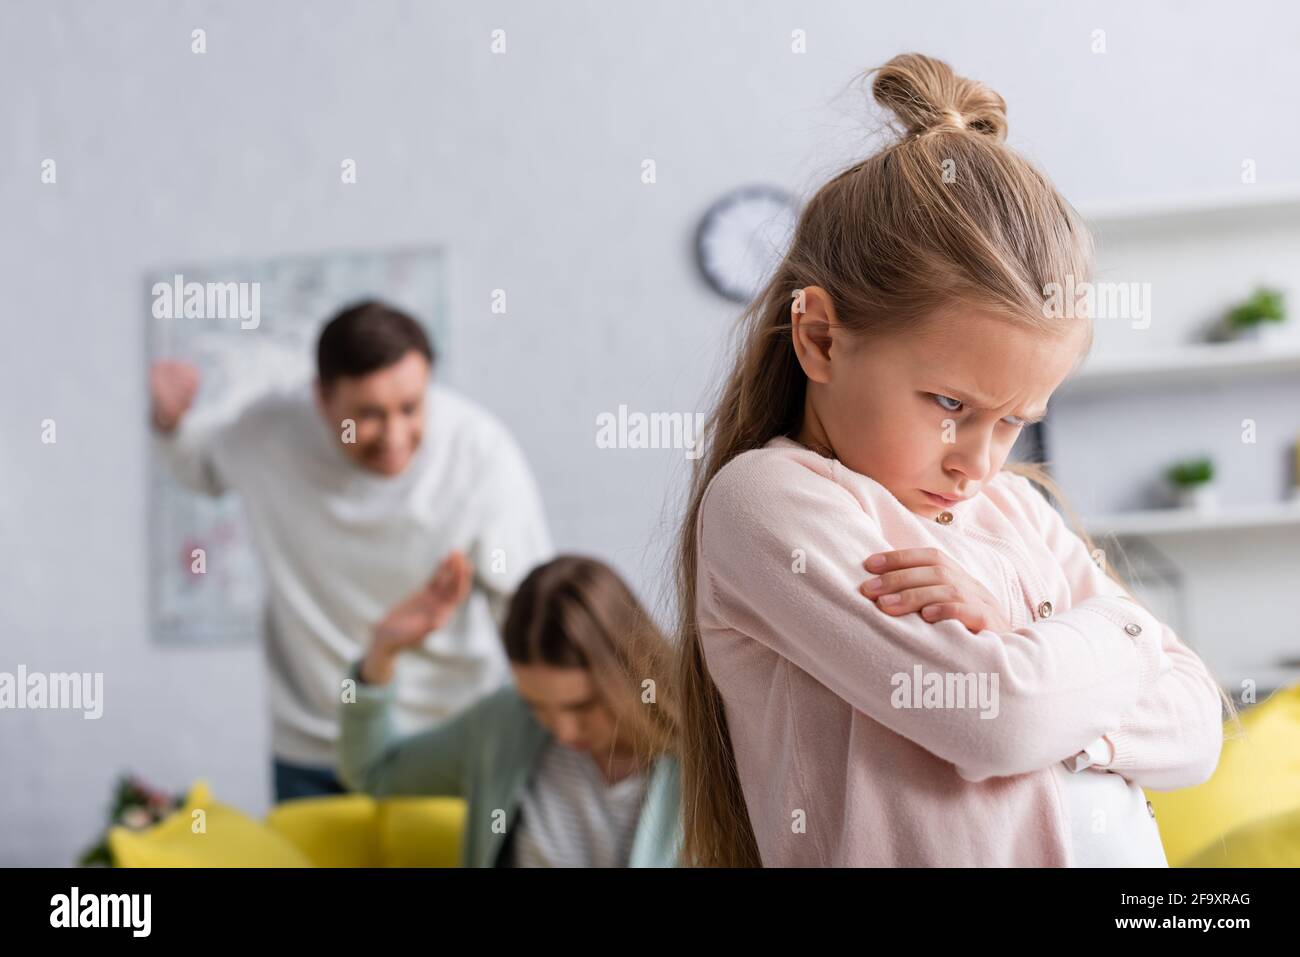 Angry kid standing near parents quarrelling on blurred background Stock Photo